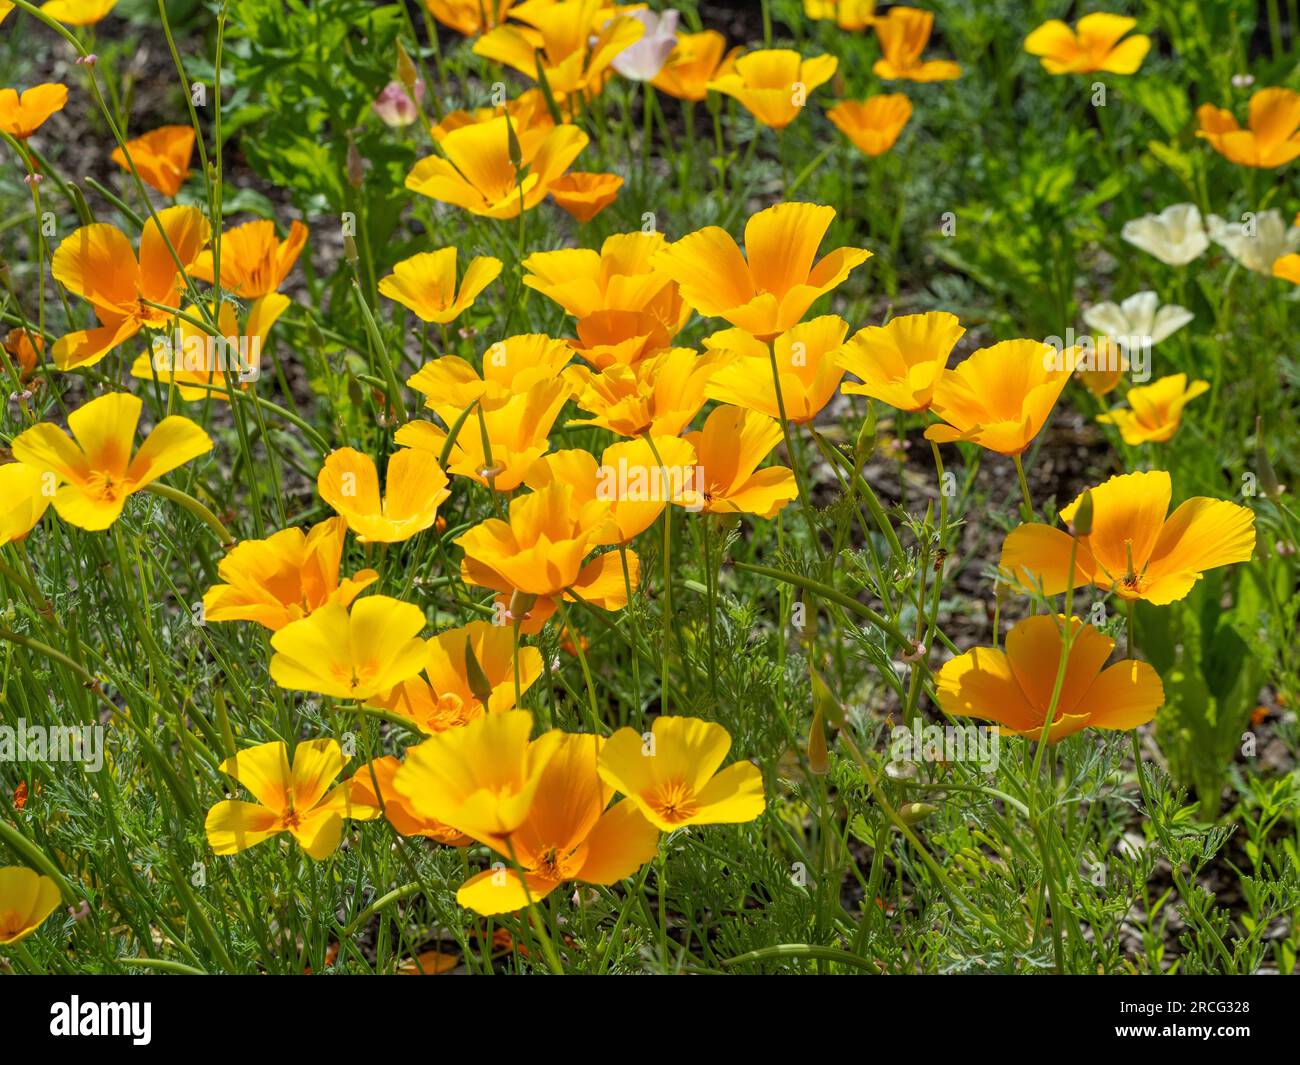 Yellow flowers of Californian poppies glowing in the sunlight of a UK garden. Stock Photo